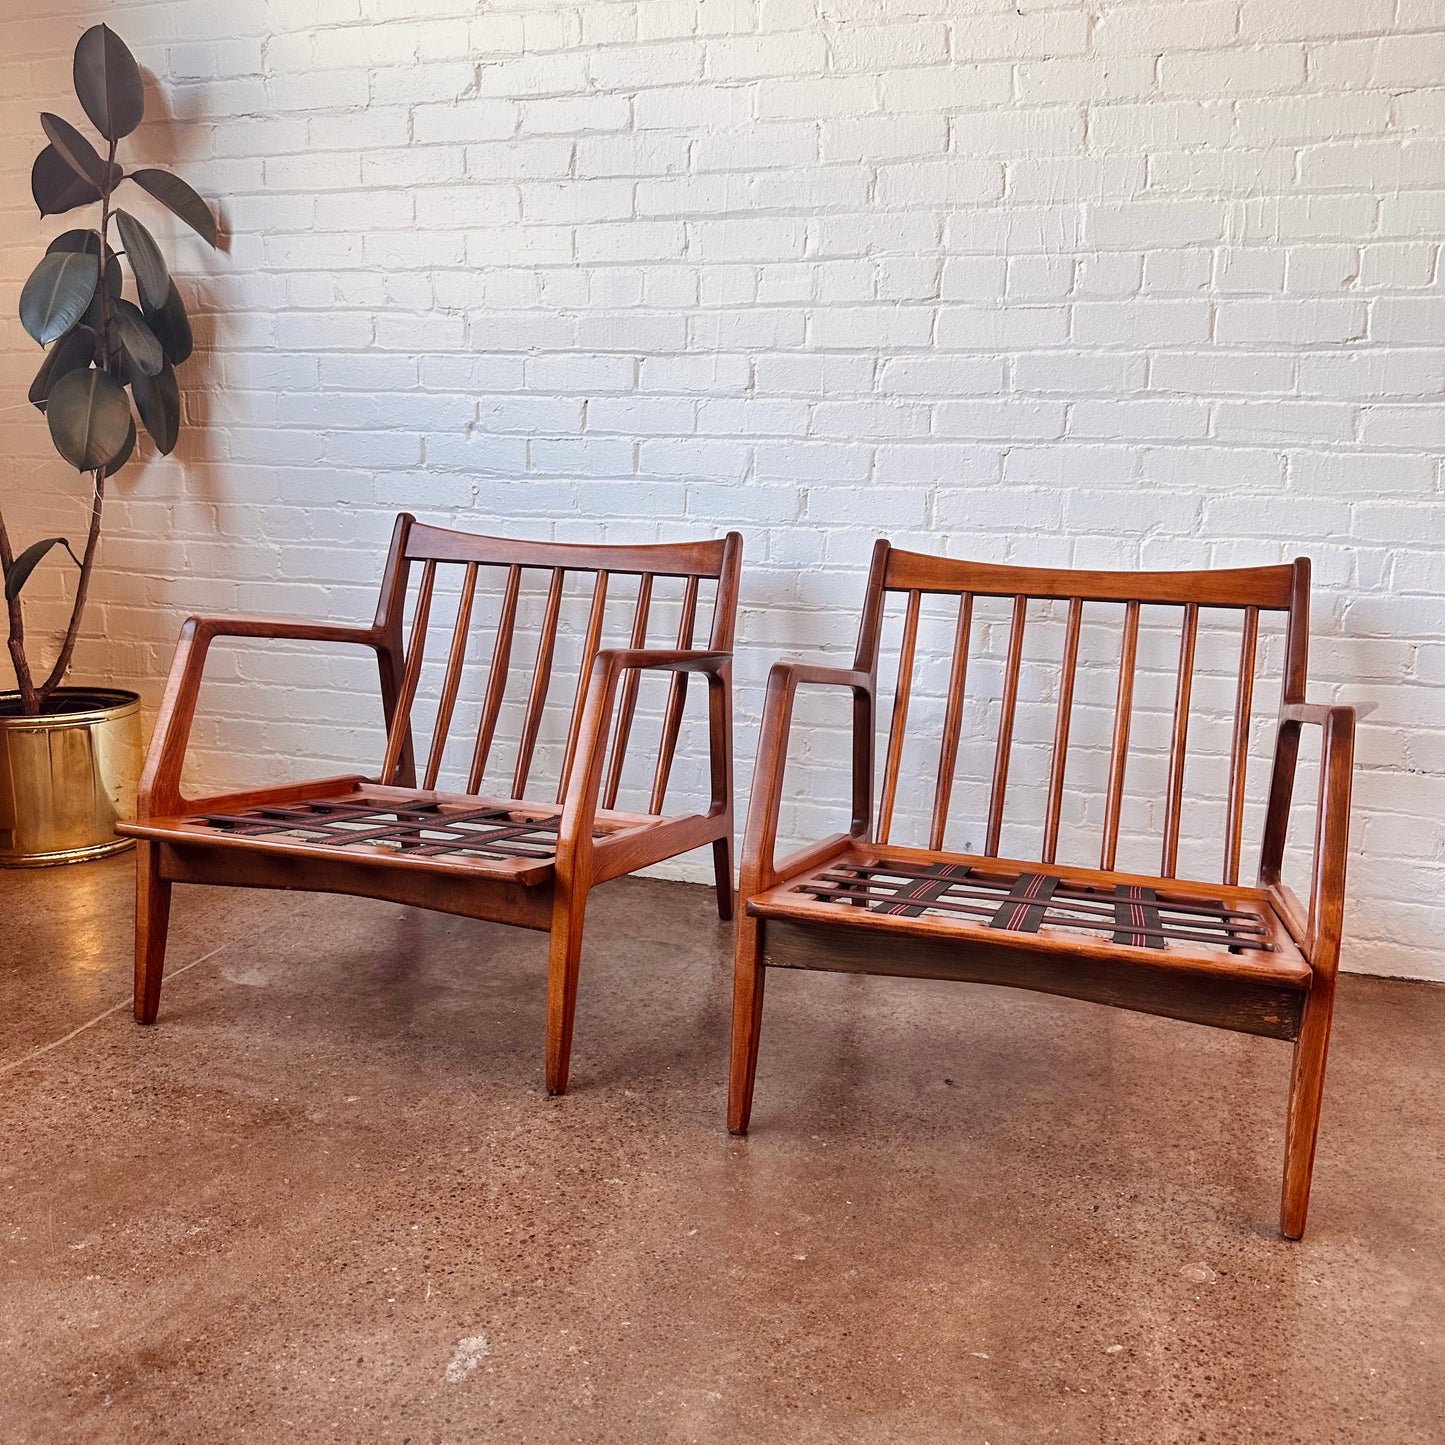 RESTORED LAWRENCE PEABODY ACCENT CHAIRS - PAIR